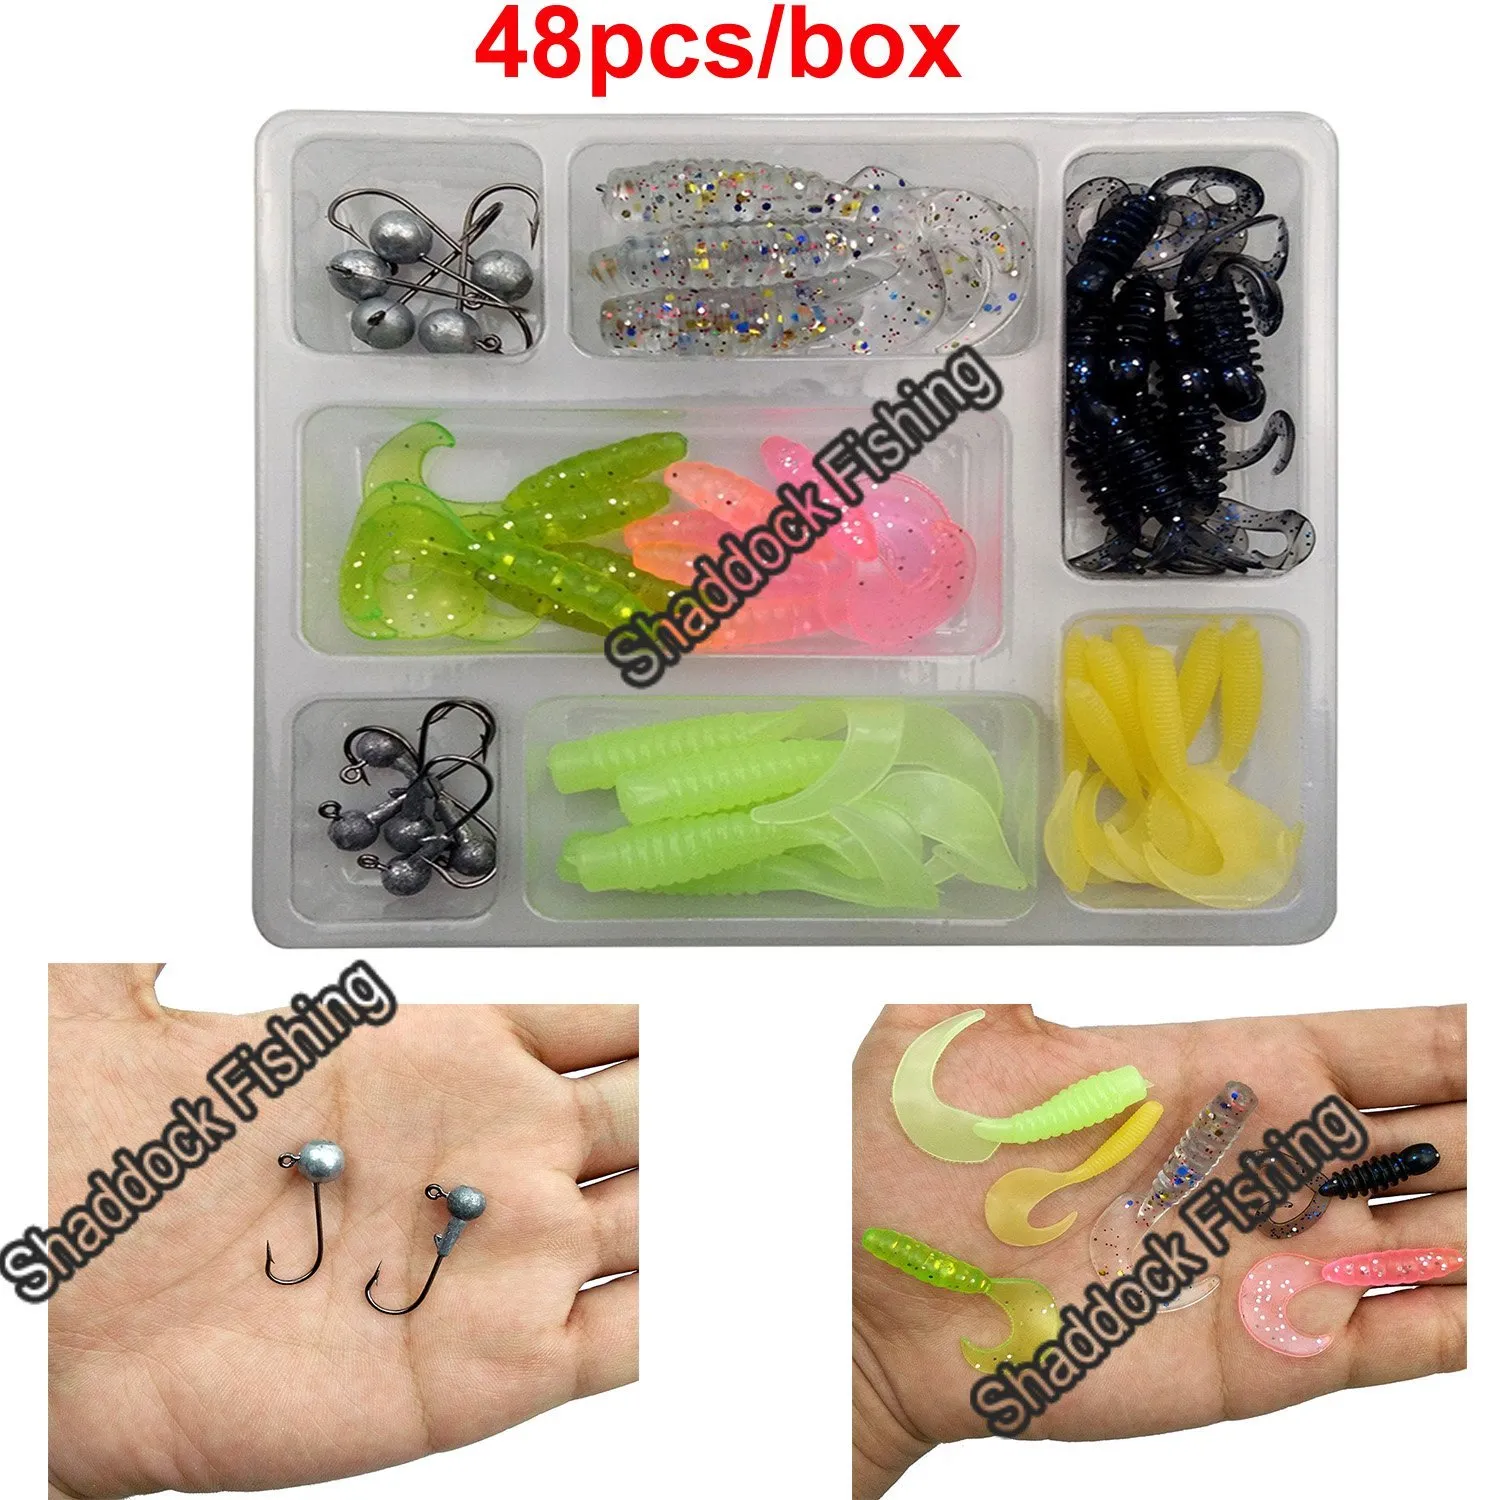 Shaddock 47 Crappie Lure Kit Soft Pro Tackle For Bass, Jigs & Jigs Fish  Fishing Gear Accessories From Gtiudz, $15.08